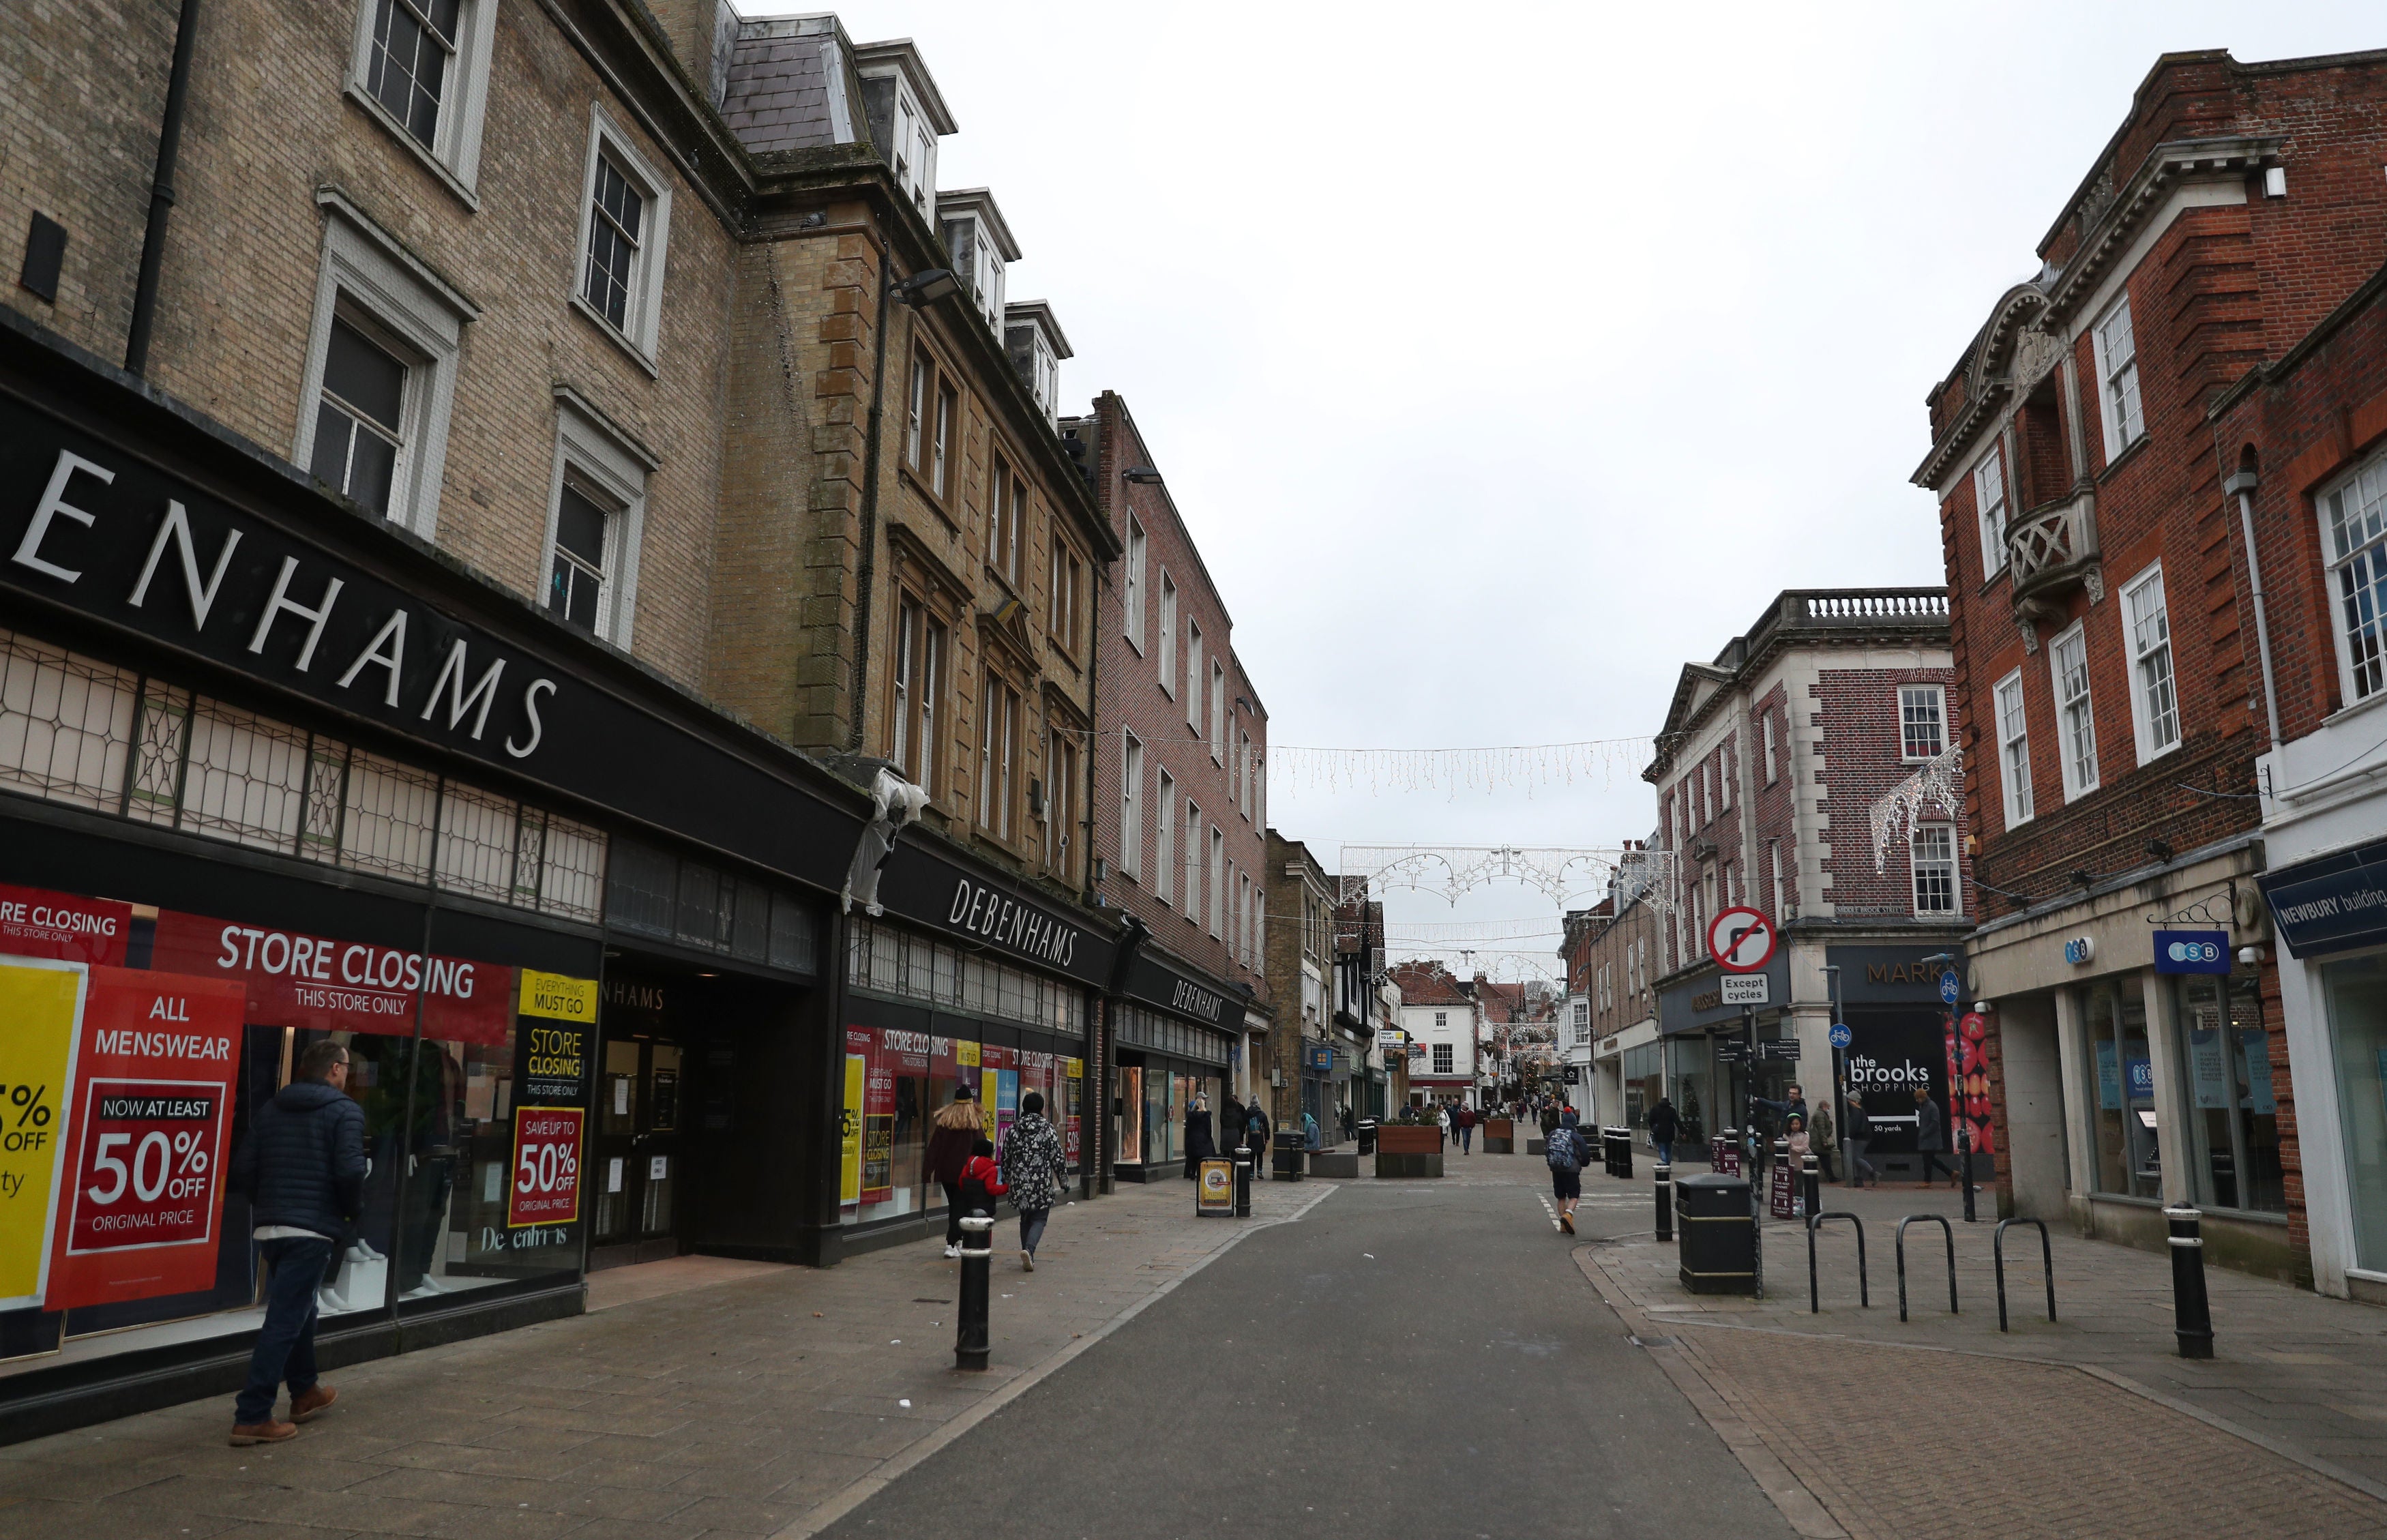 High streets saw a 49.5 per cent drop in footfall compared to last year while retail parks were more resilient, registering a 17.3 per cent fall